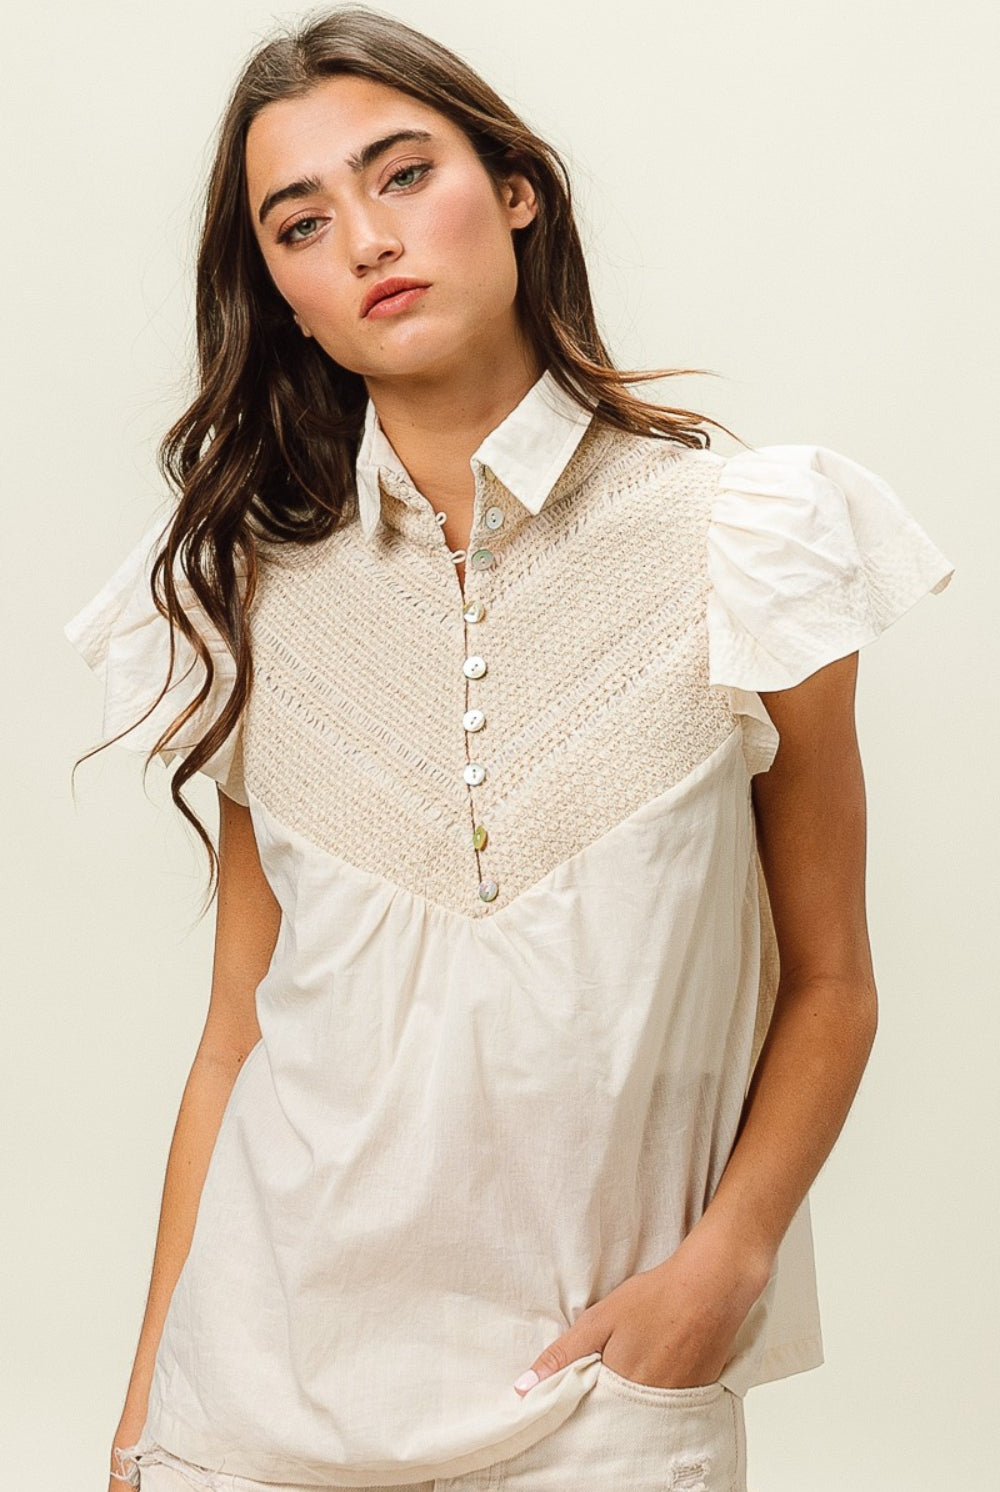 Woman wearing a beige short sleeve top with crochet panel and puff sleeves